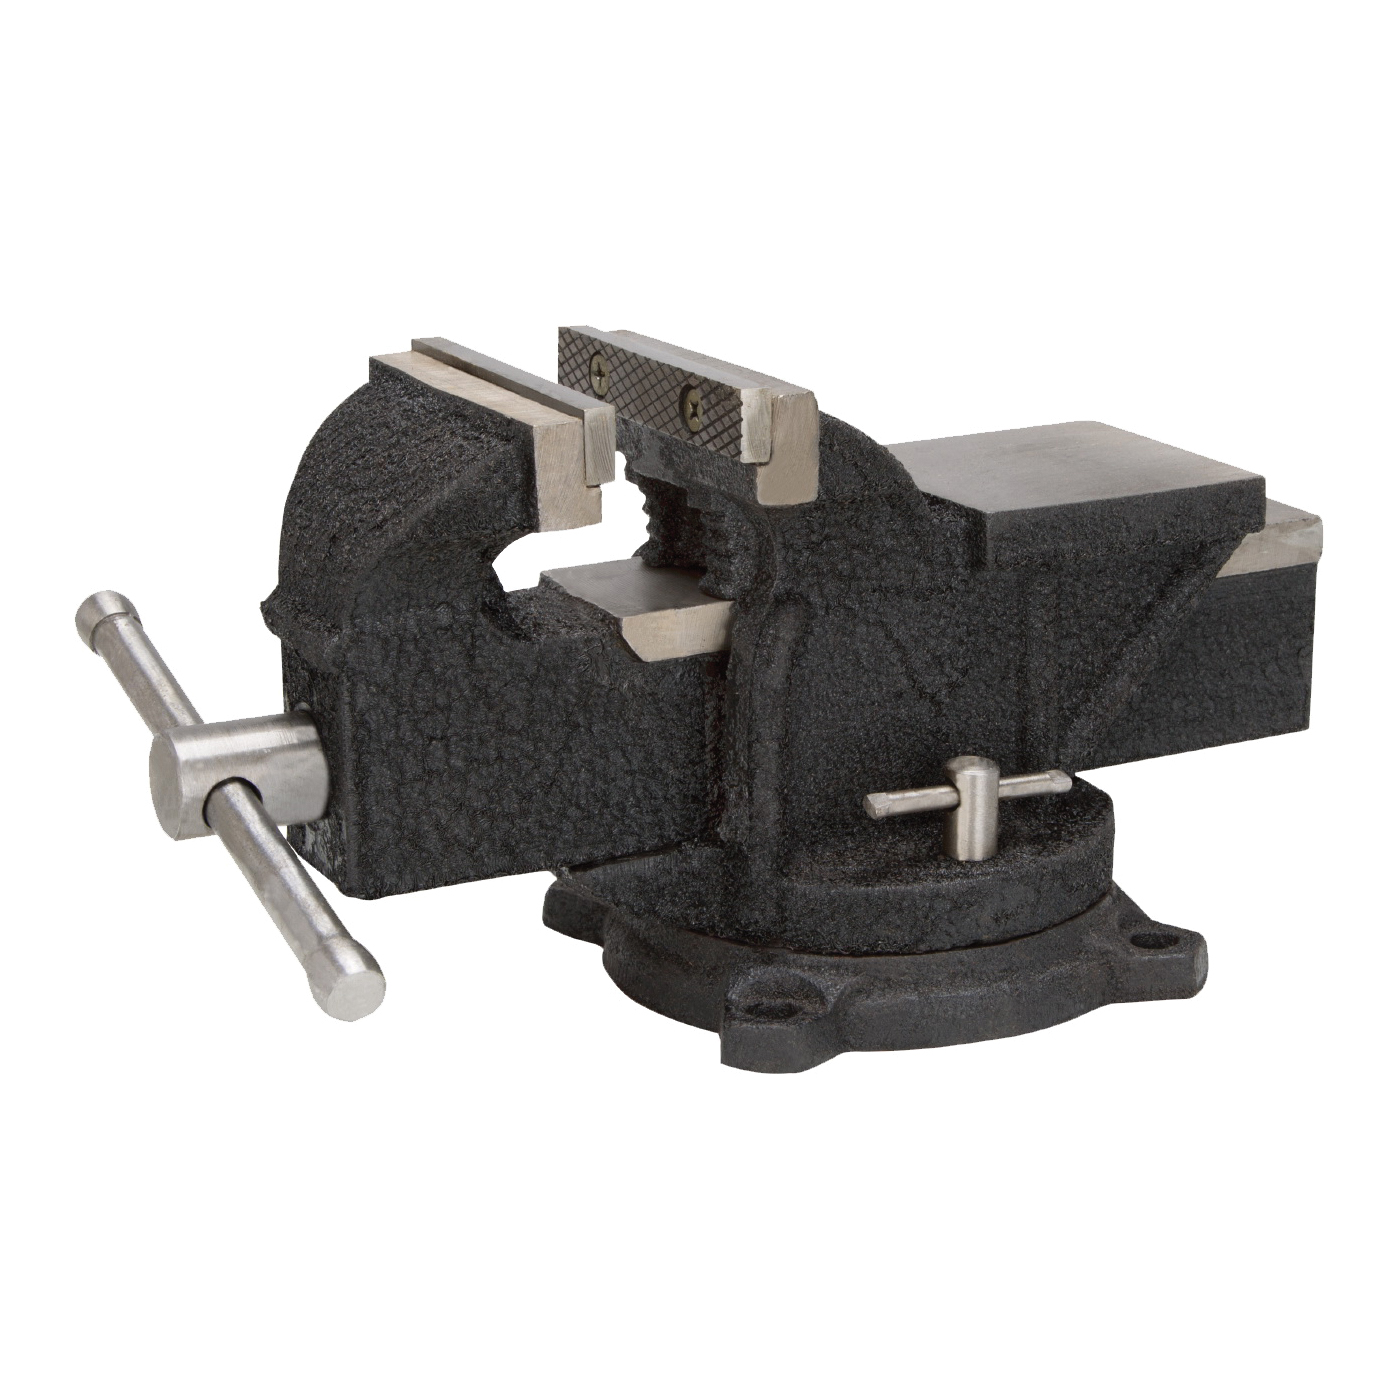 JL25011 Bench Vise, 4 in Jaw Opening, 3/8 in W Jaw, 2.25 in D Throat, Cast Iron Steel, Serrated Jaw